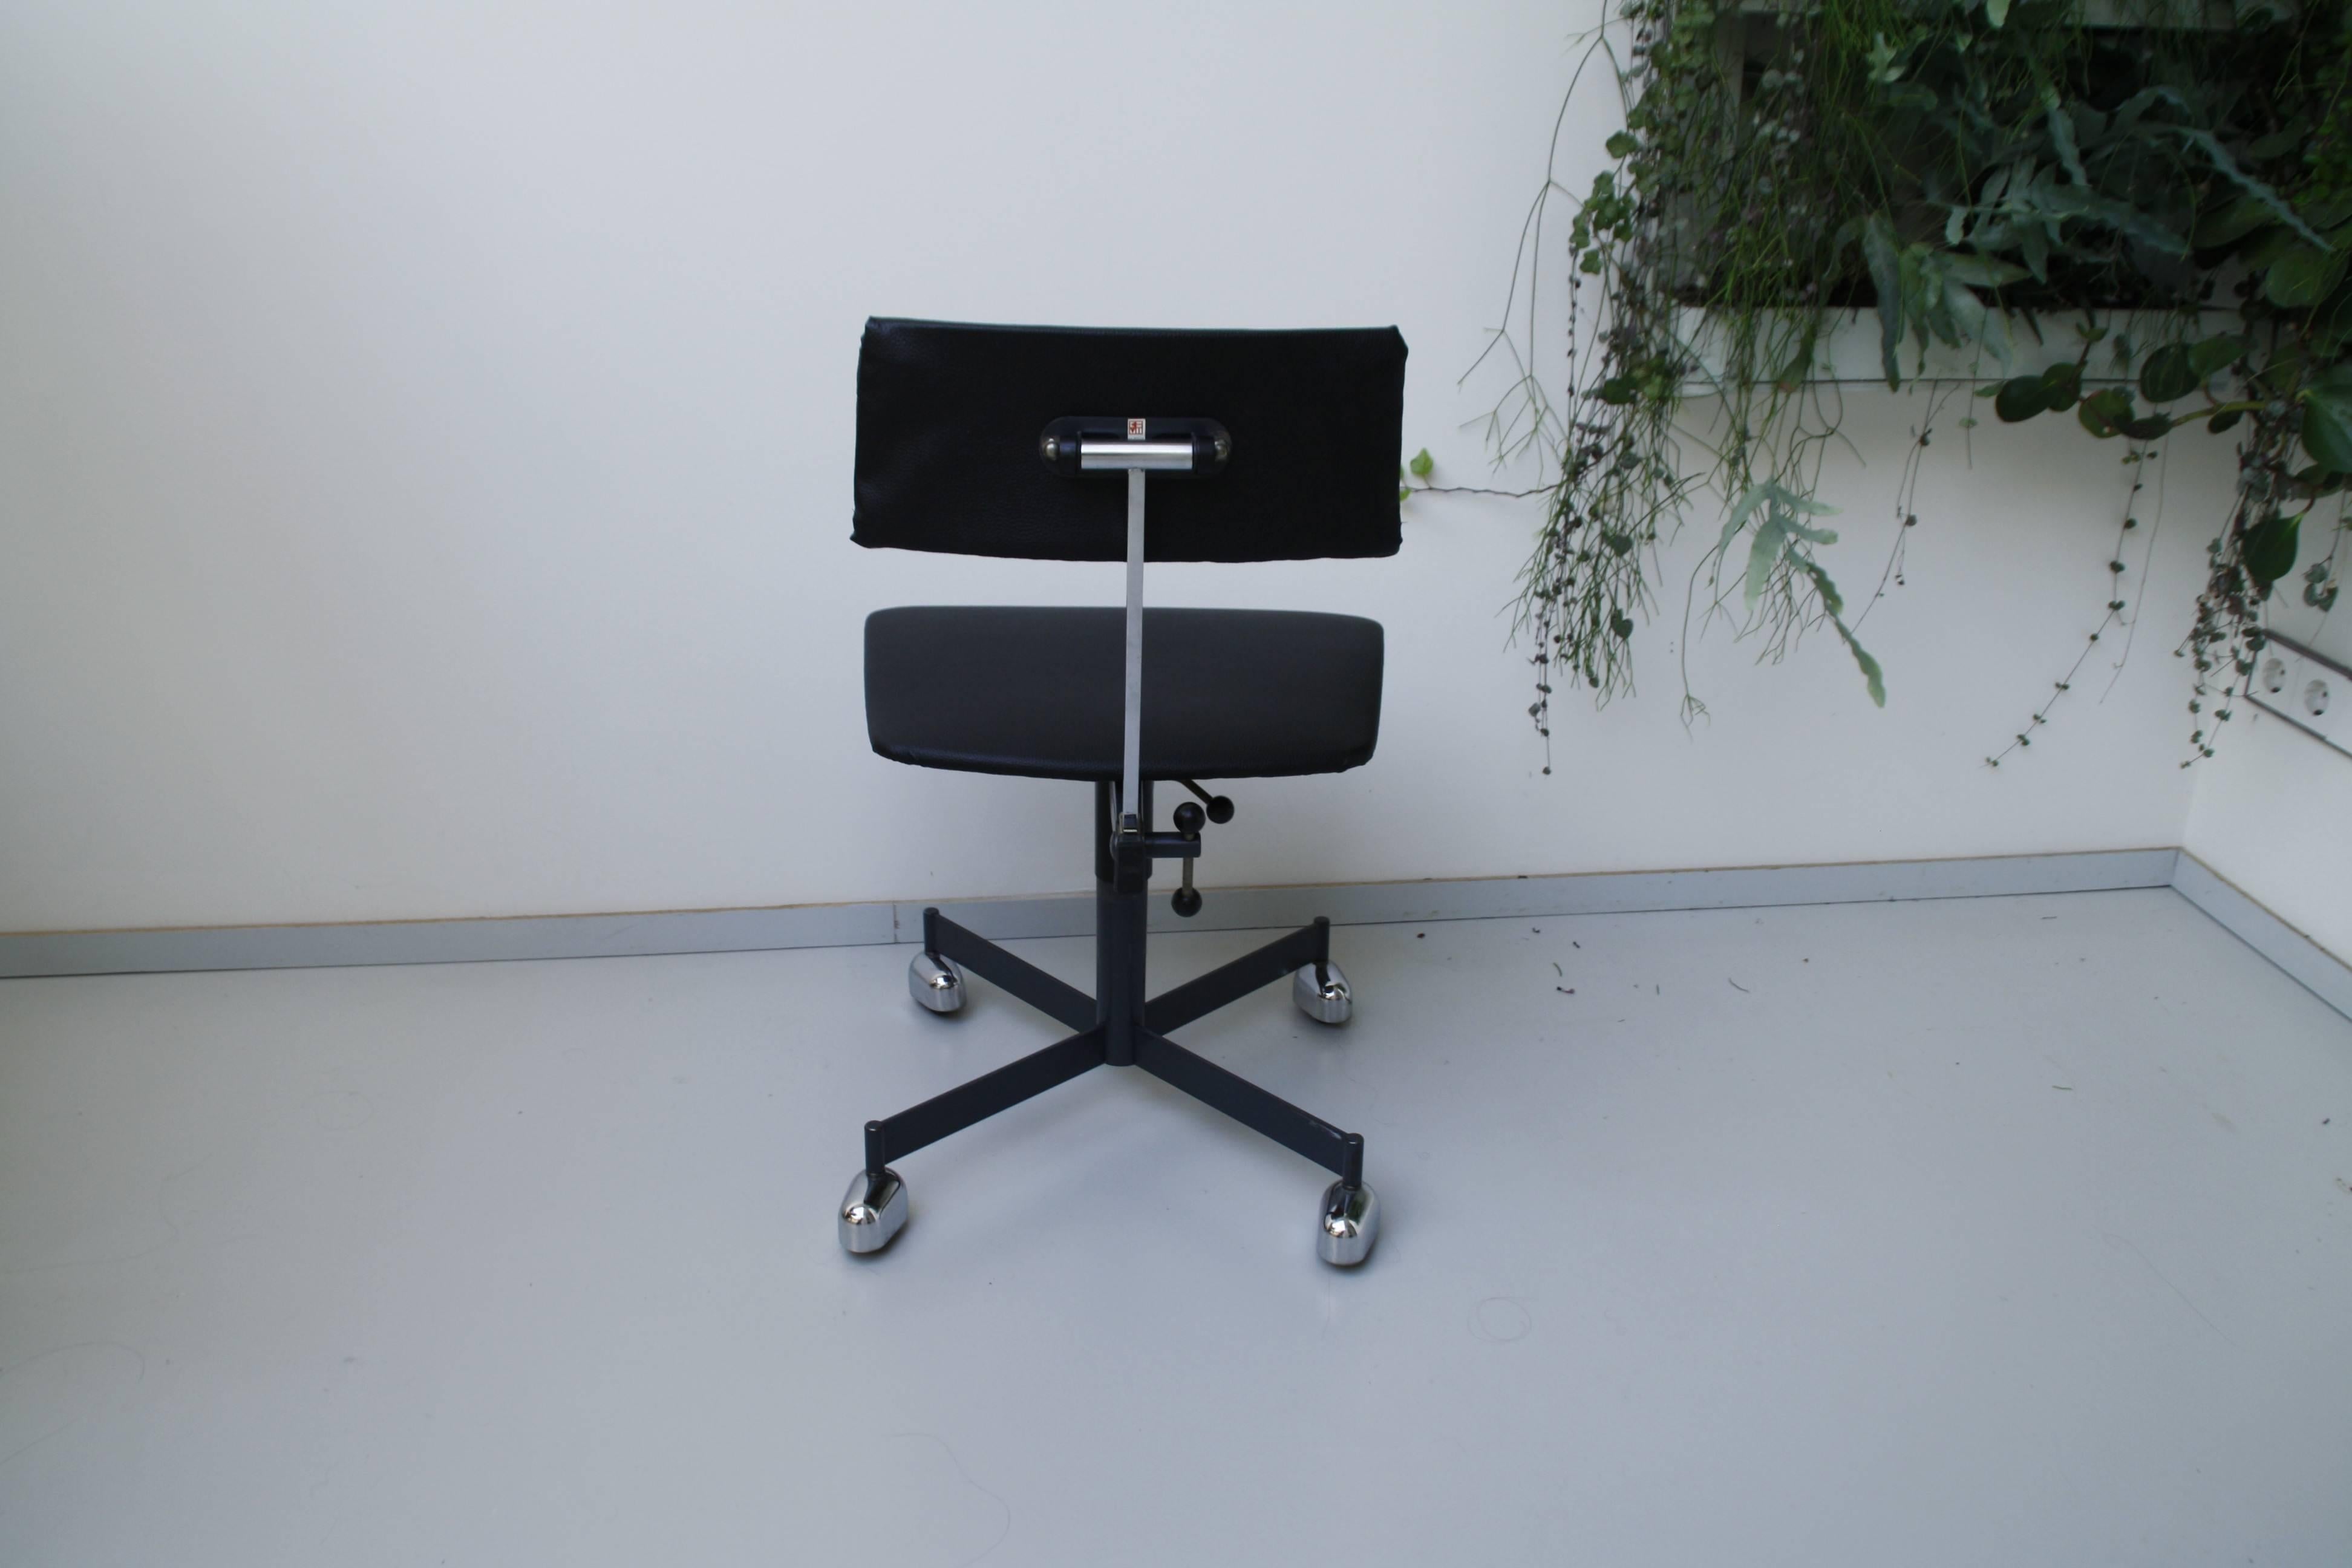 An early model of the adjustable Kevi swivel chair of the designers Ib & Jørgen Rasmussen. The seat and back are black leatherette, the base is black steel and the casters are the rare chrome covered design. 
Measures: Seat height 40-55 cm.
 